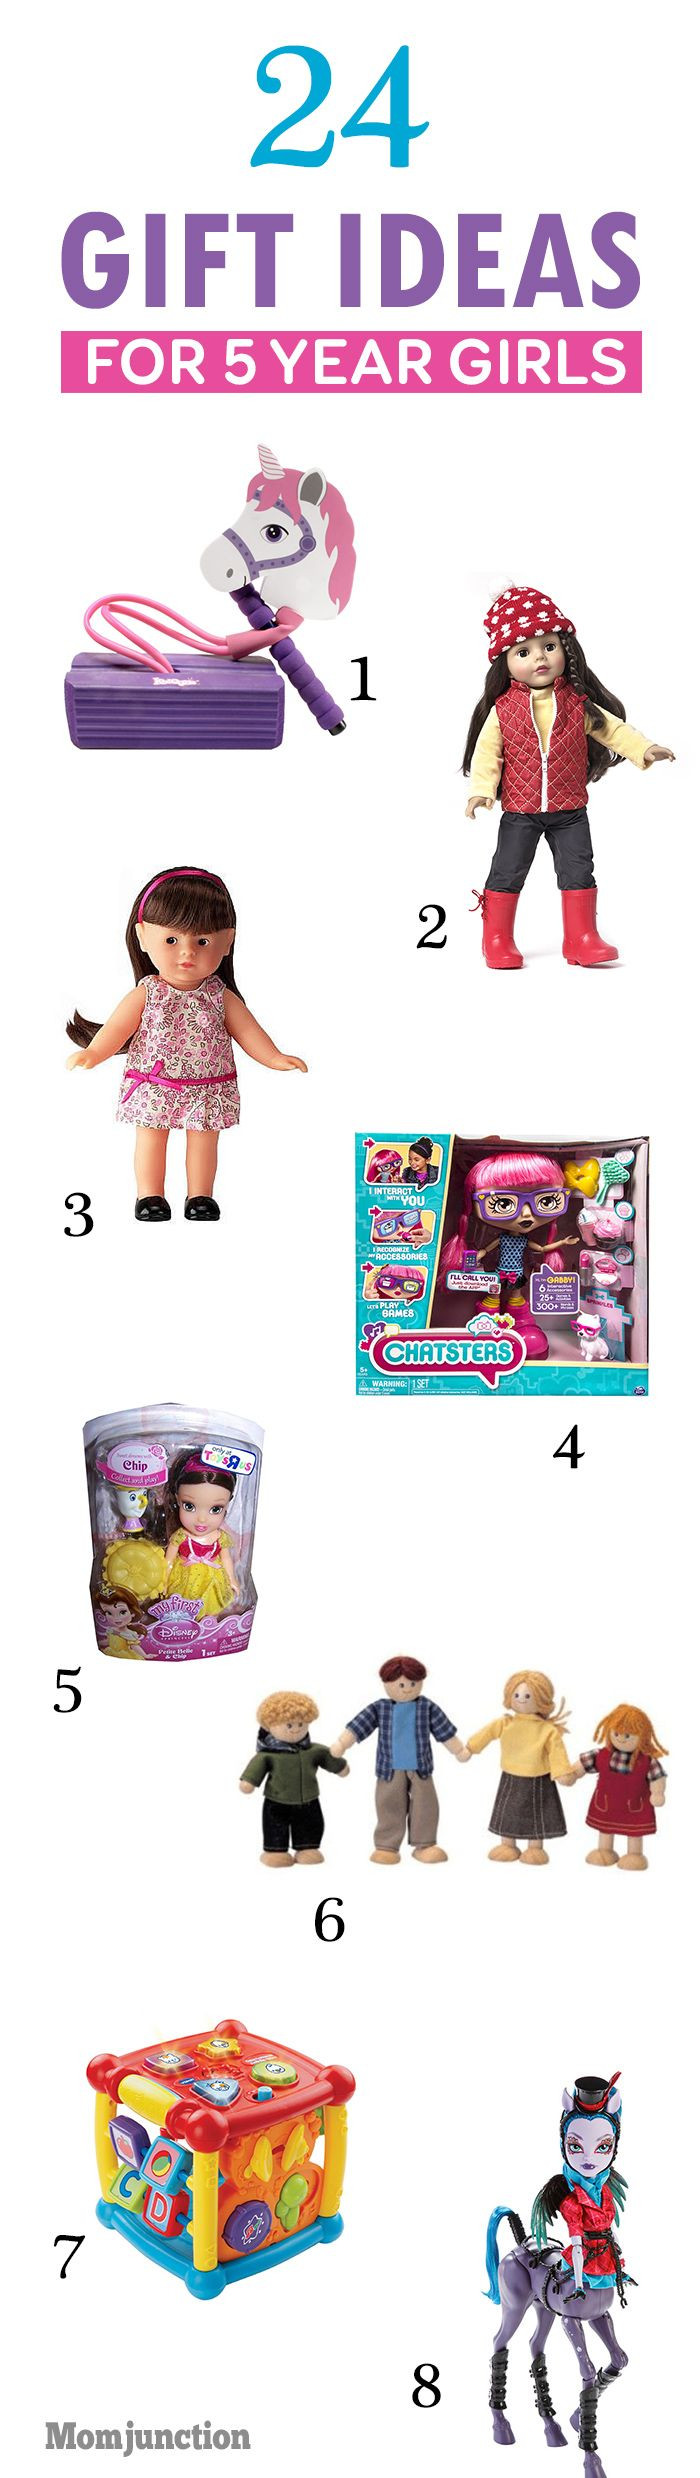 5 Yr Old Girl Birthday Gift Ideas
 31 Best Gifts For 5 Year Old Girls To Buy In 2020